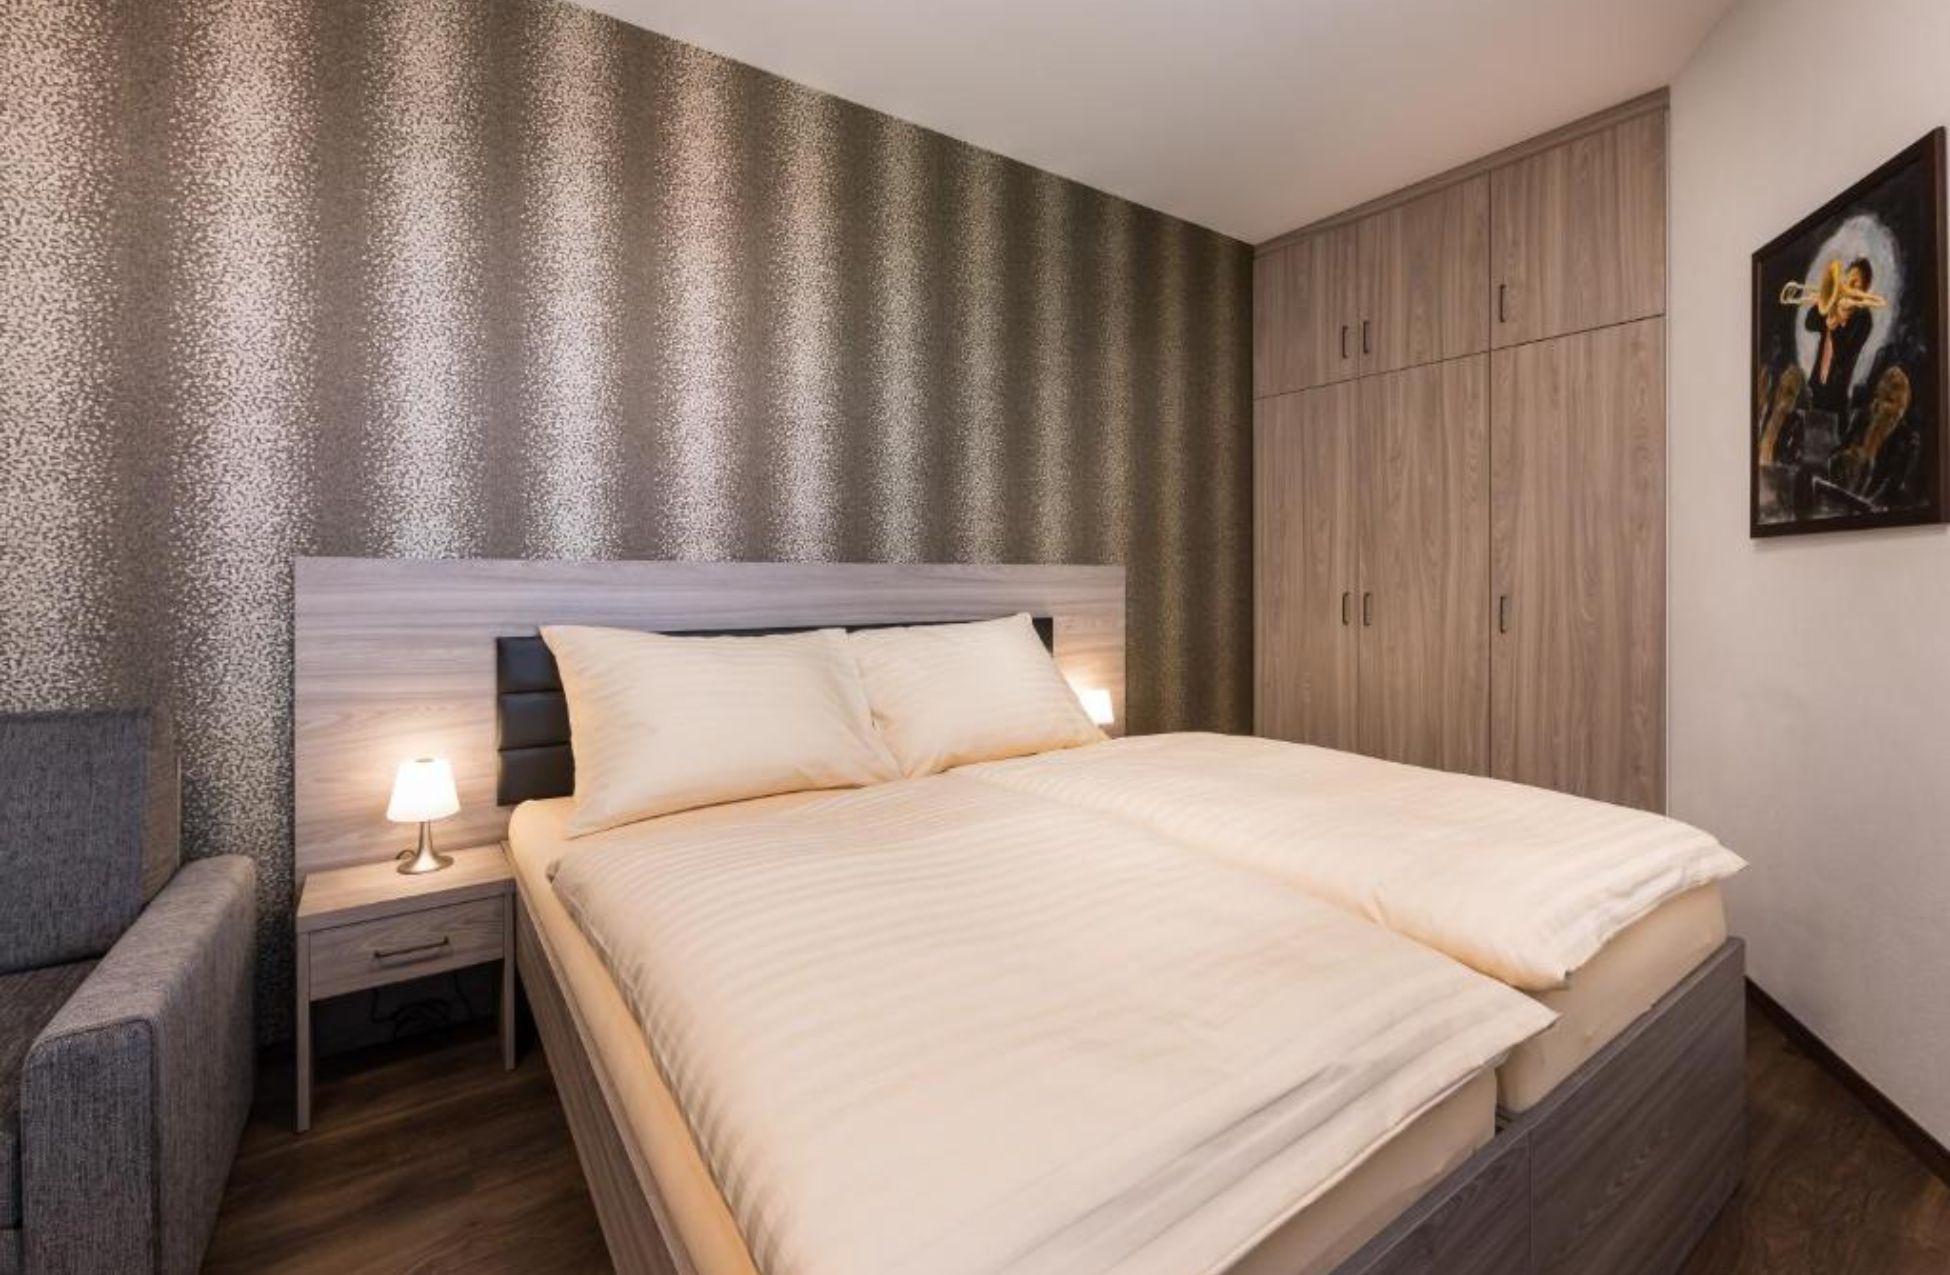 Barok Hotel And Apartments - Best Hotels In Bratislava